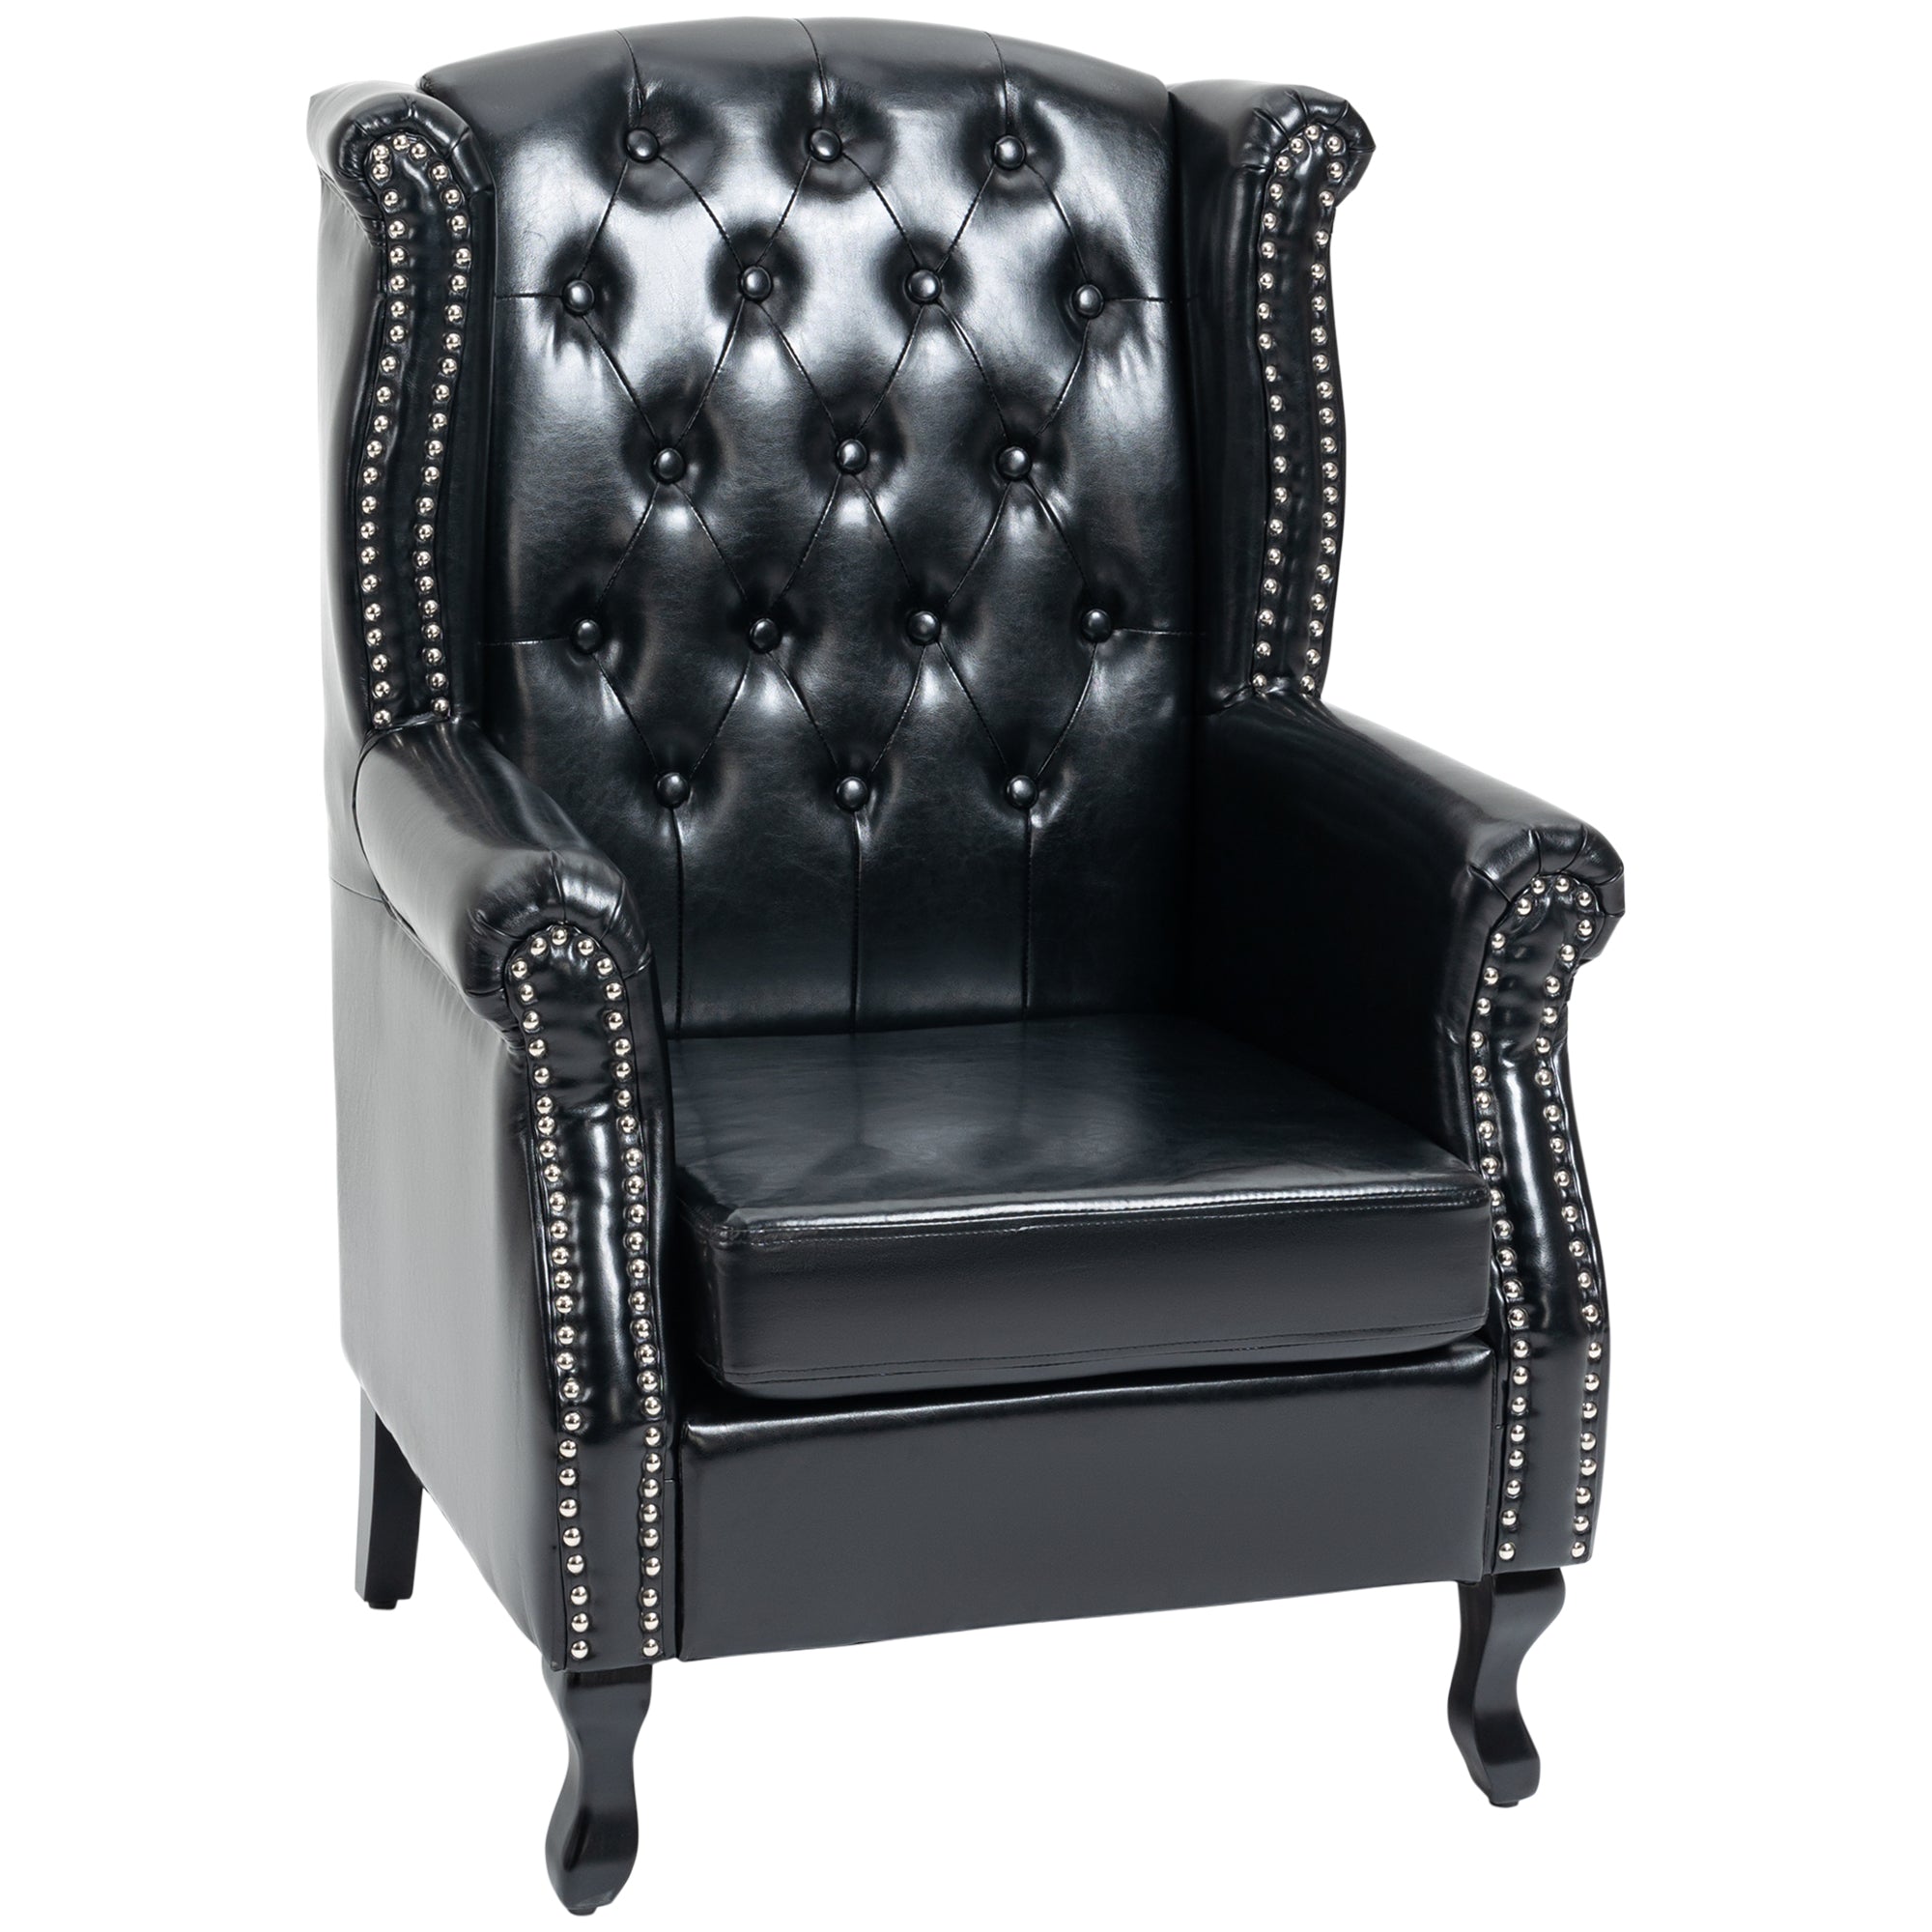 HOMCOM Wingback Armchair - Chesterfield-style High Back Fireside Chair - Tufted Upholstered Accent Chair with Nailhead Trim for Living Room - Bedroom